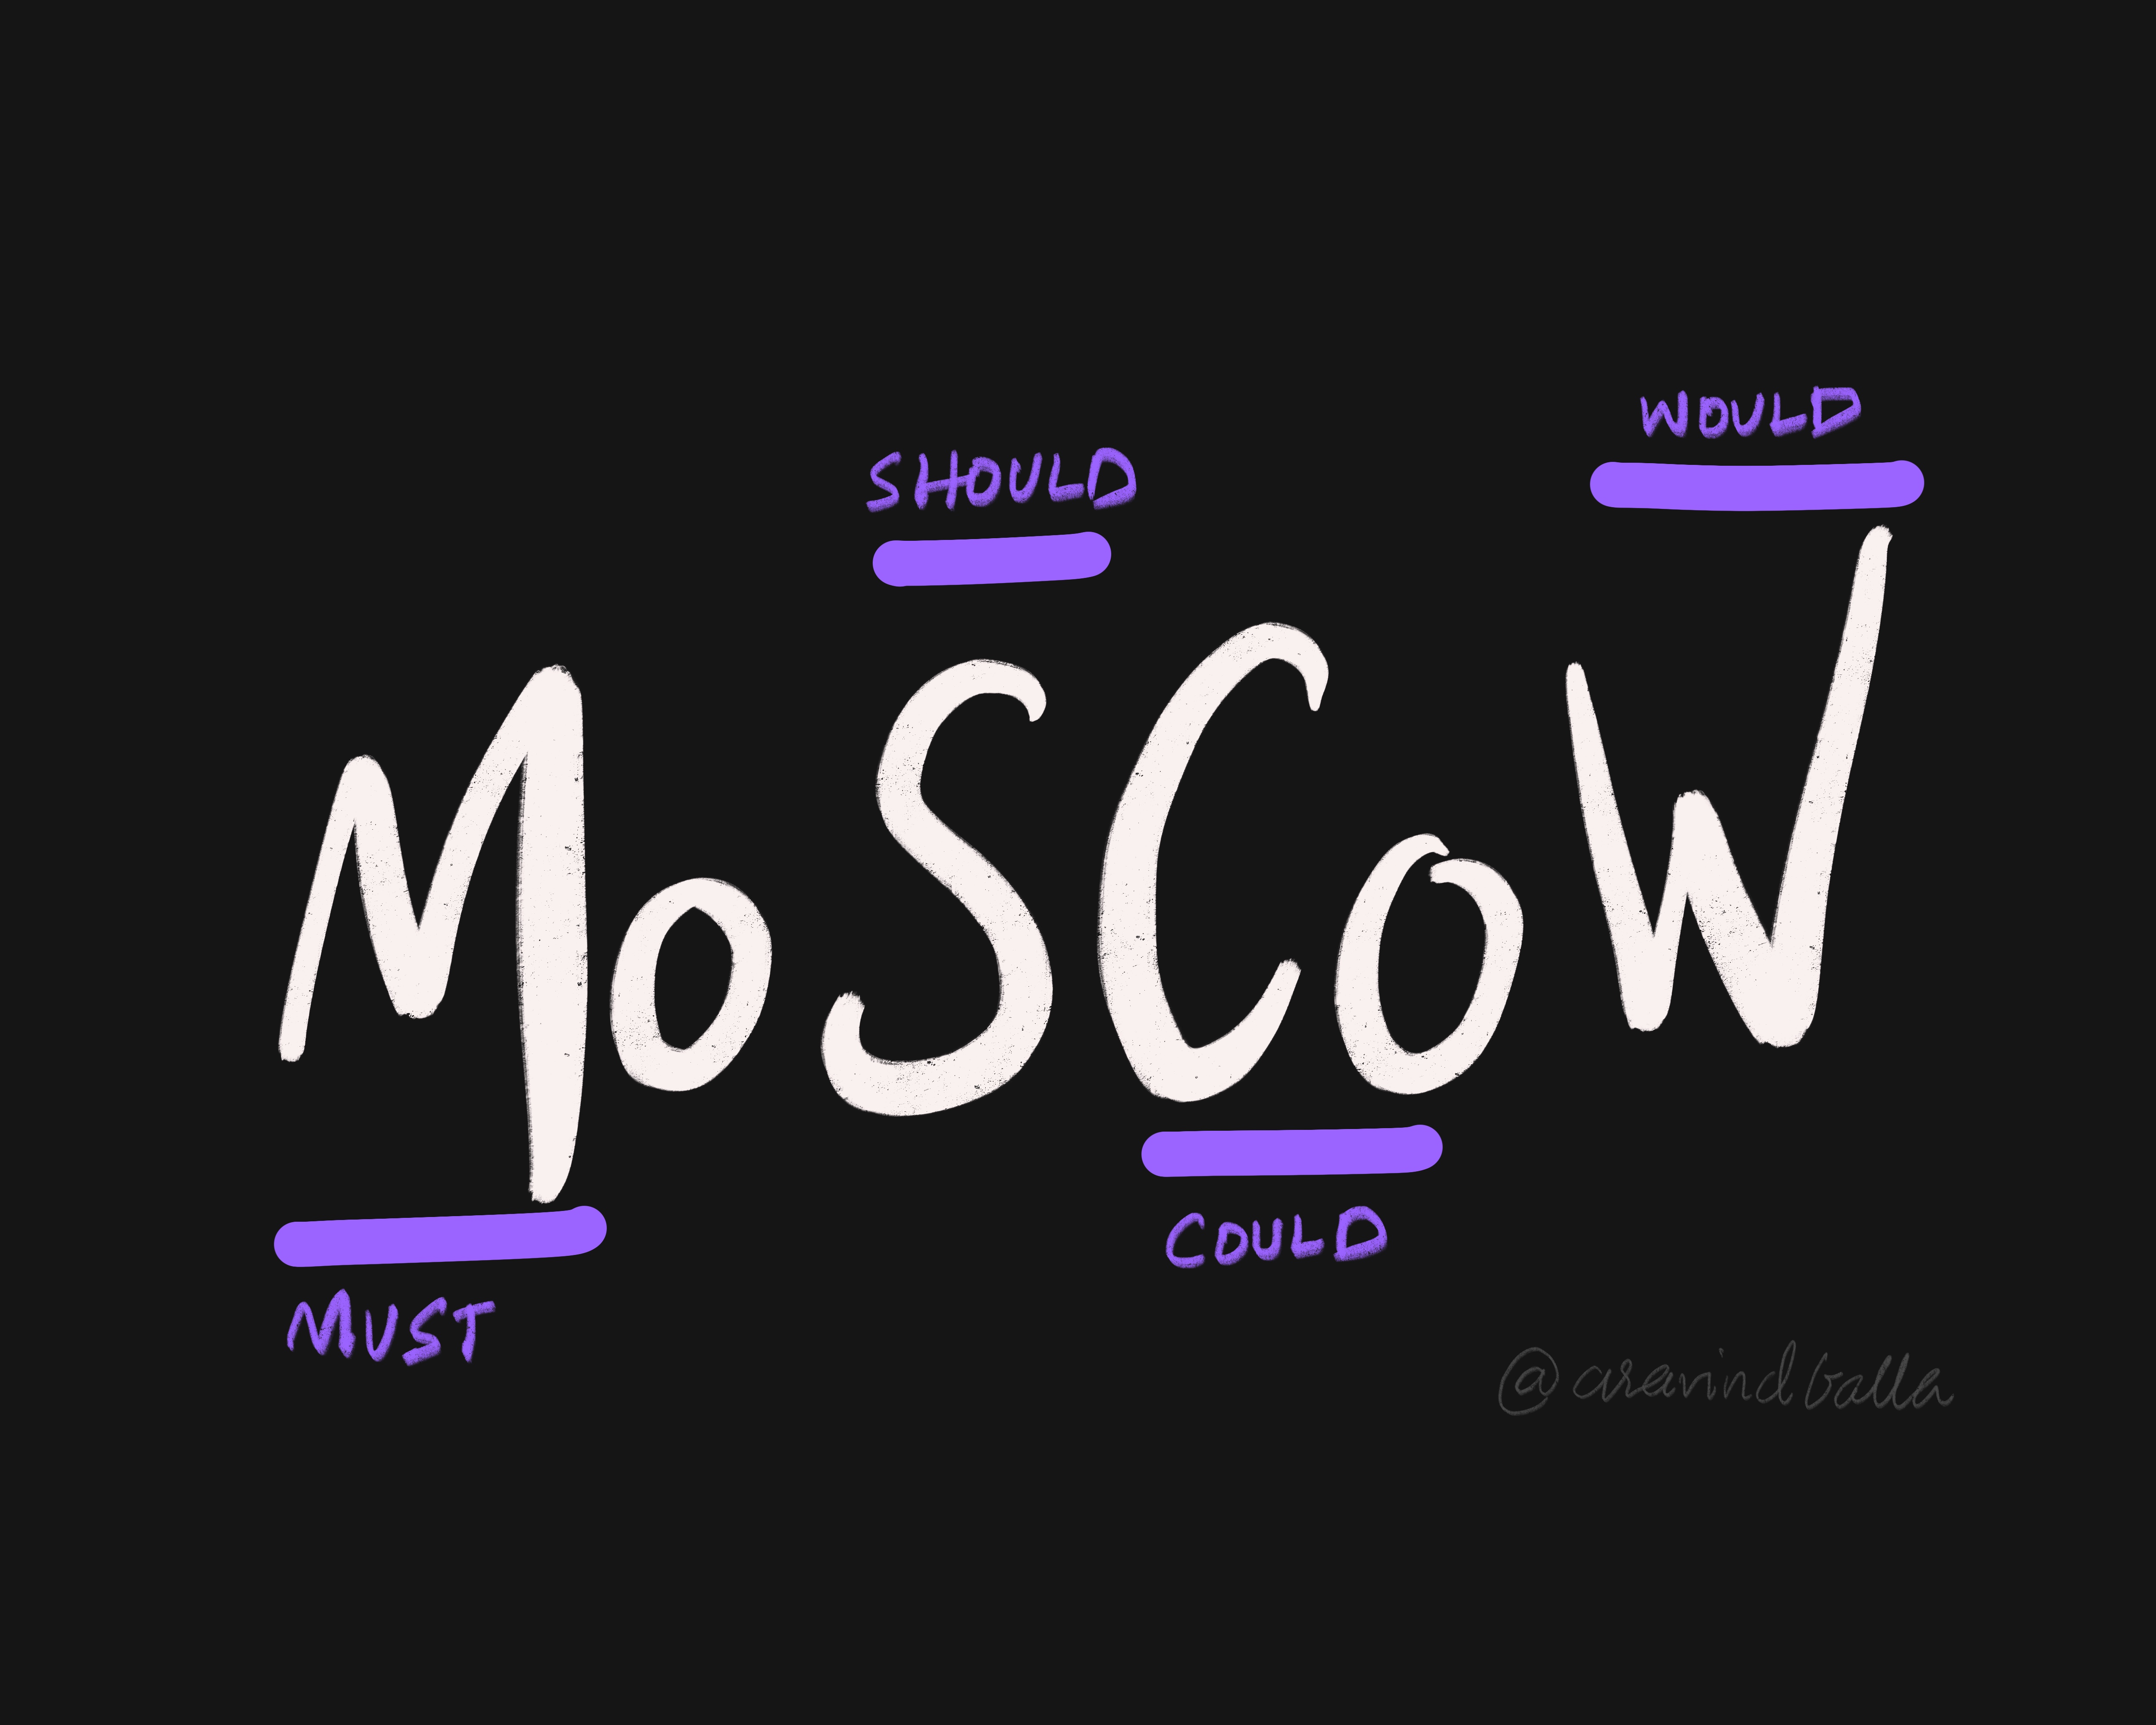 MoSCoW